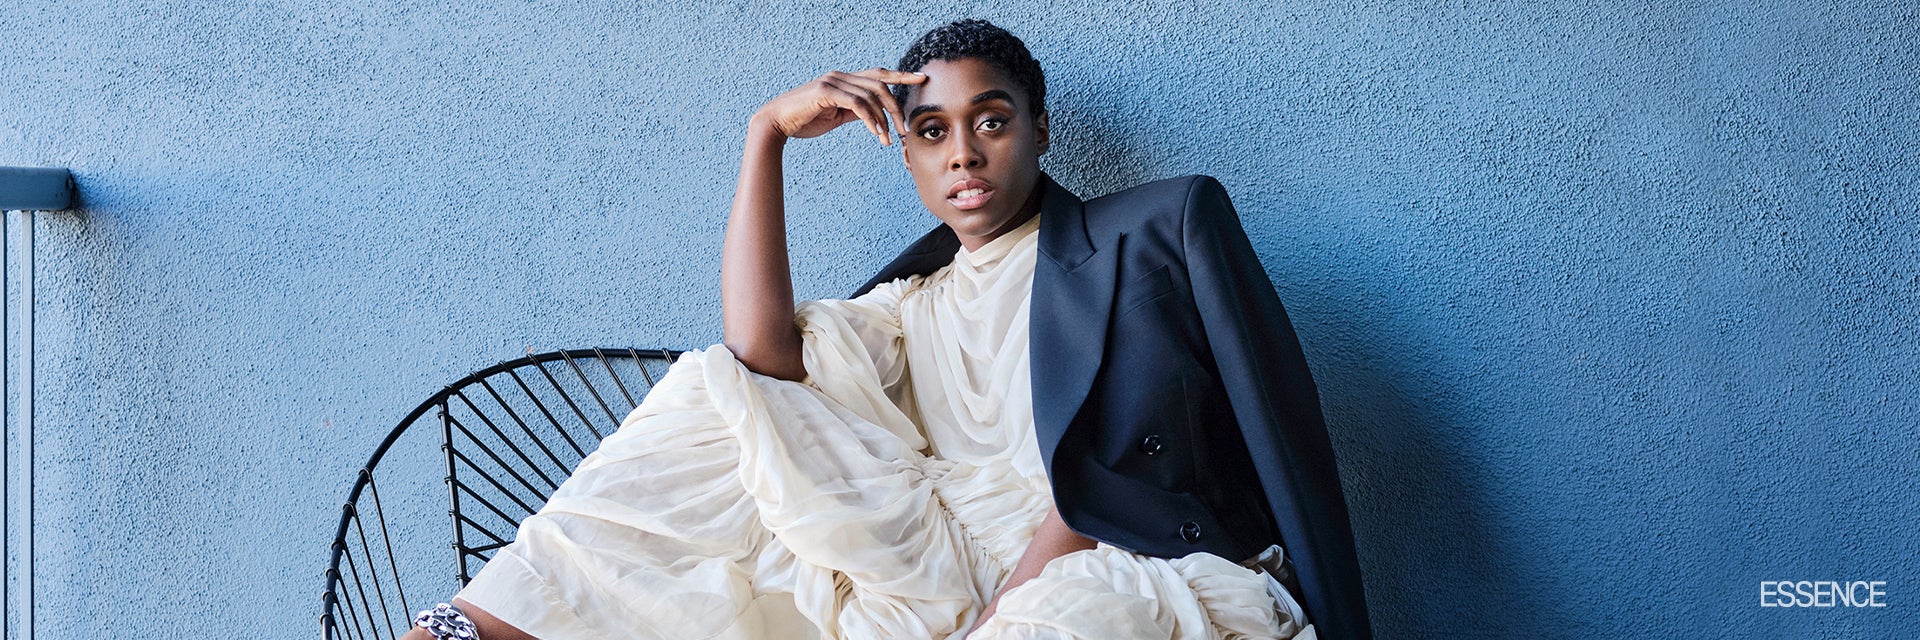 No Time To Die's Lashana Lynch Is Boldly Stepping Into Summer